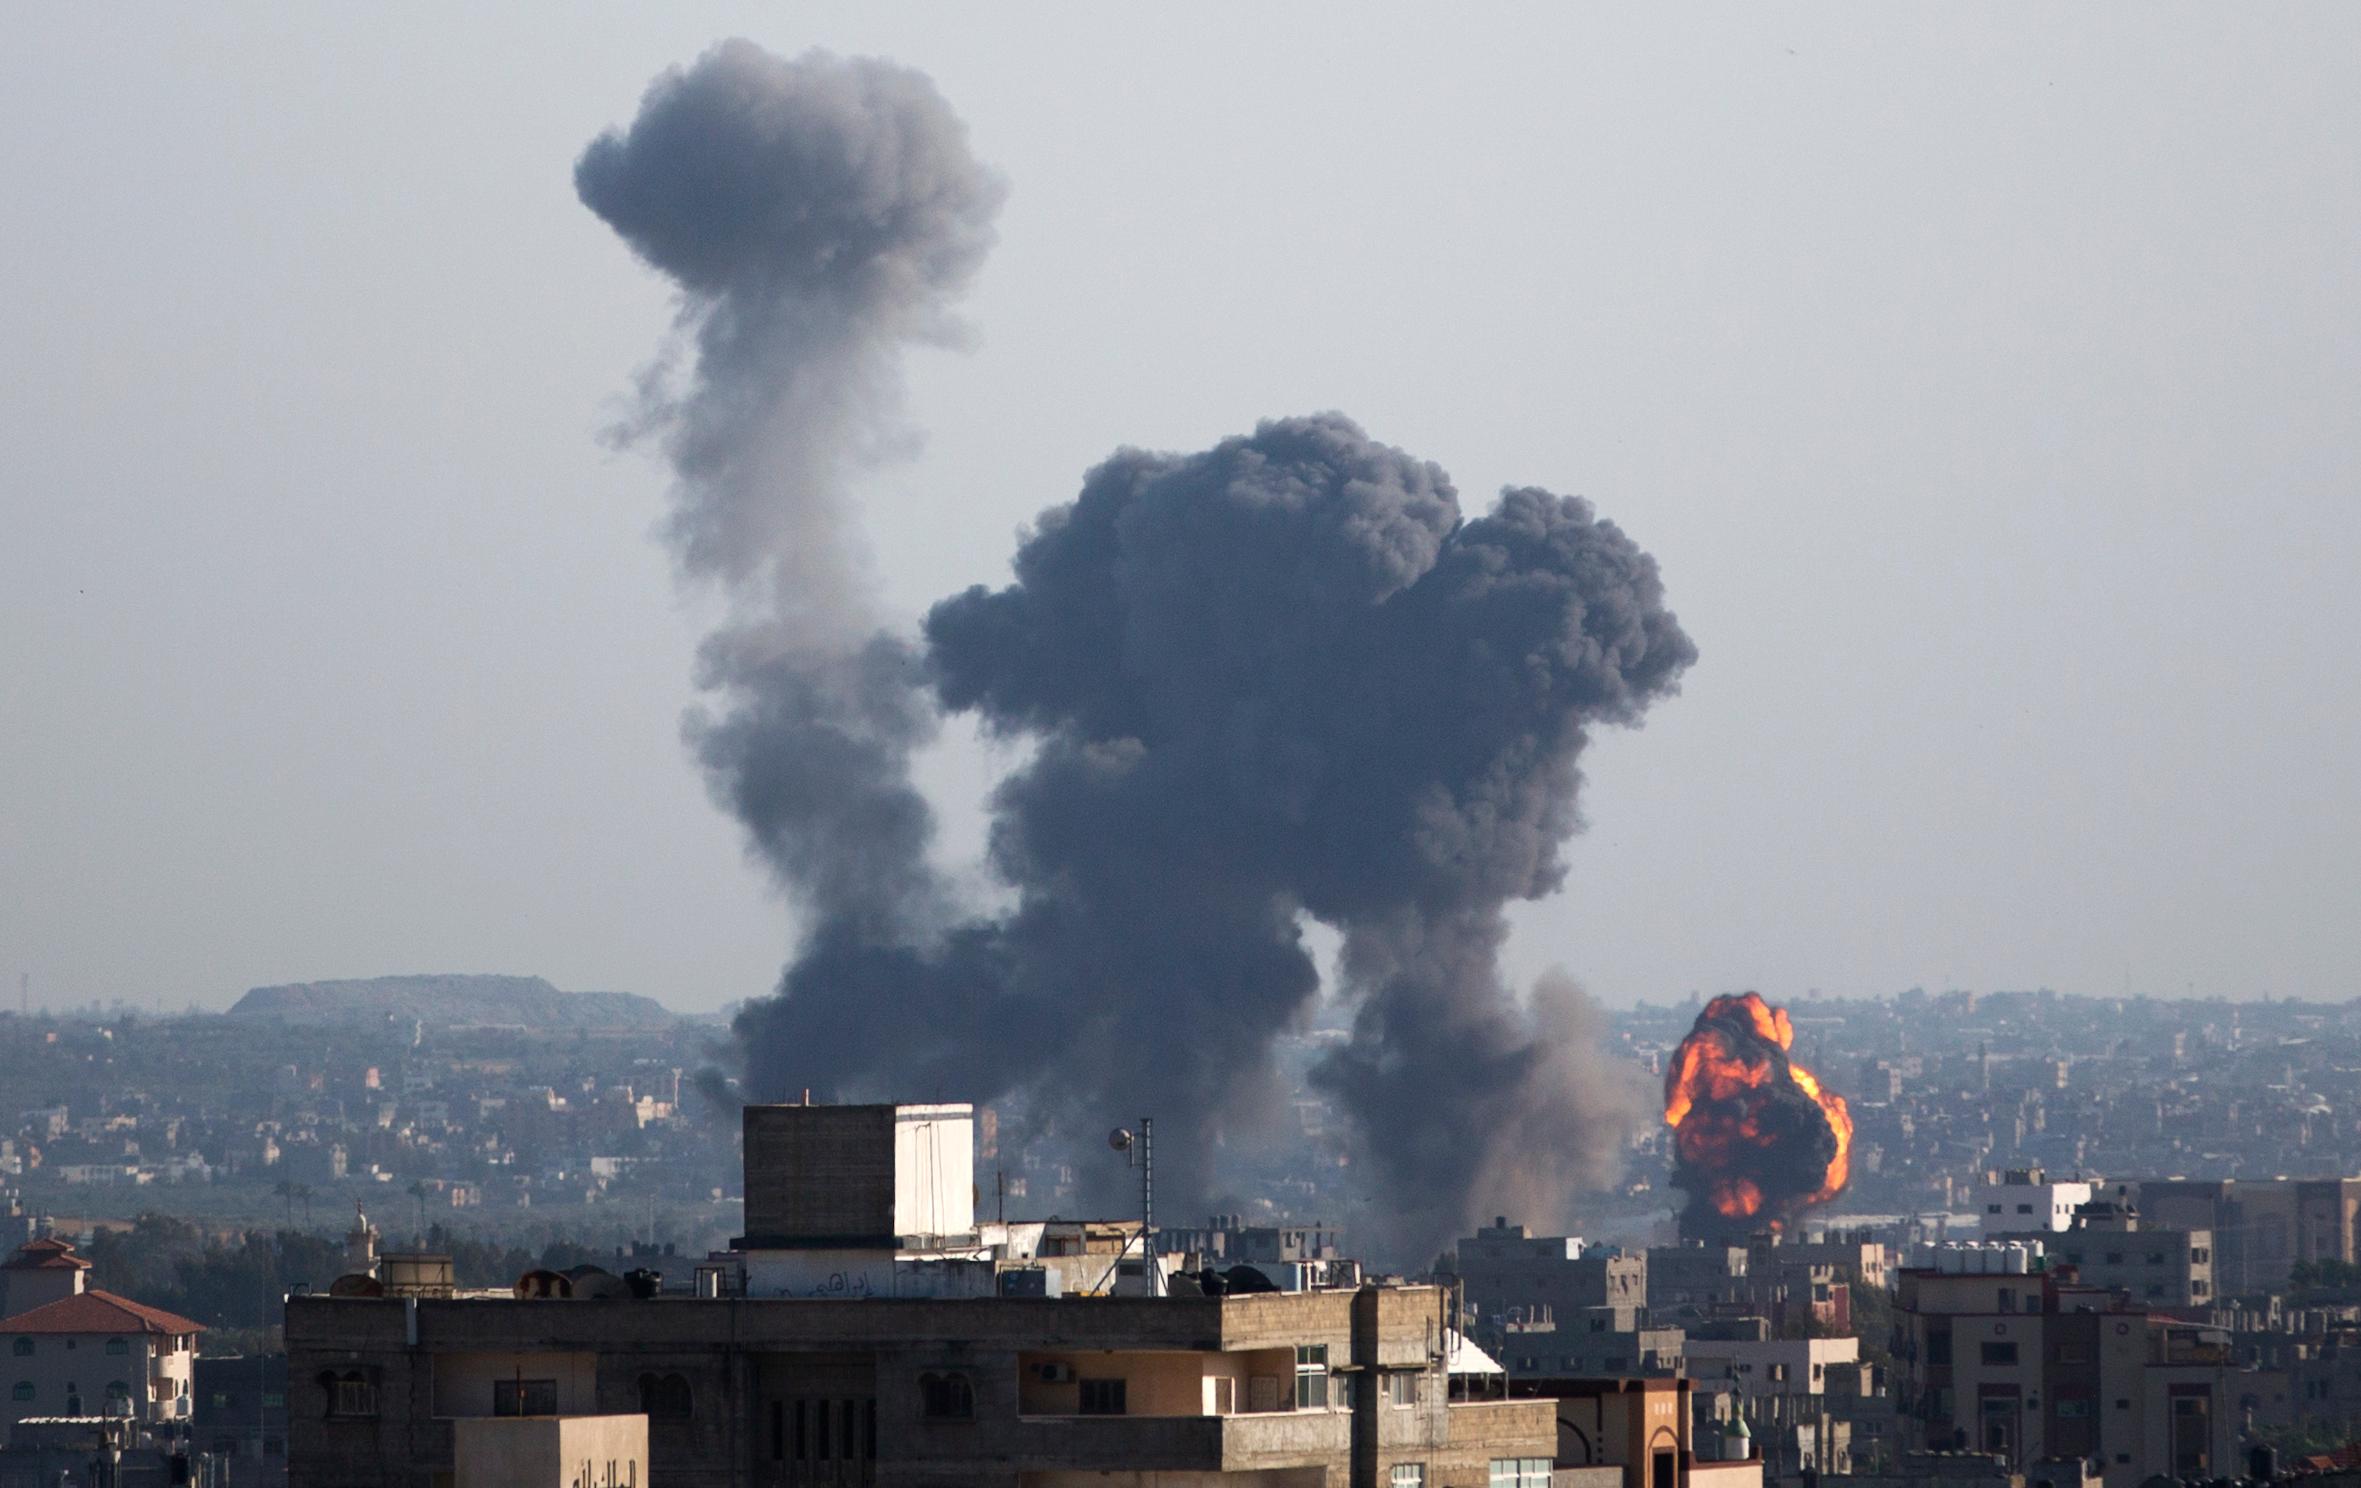 palestinian militants in the gaza strip fired at least 90